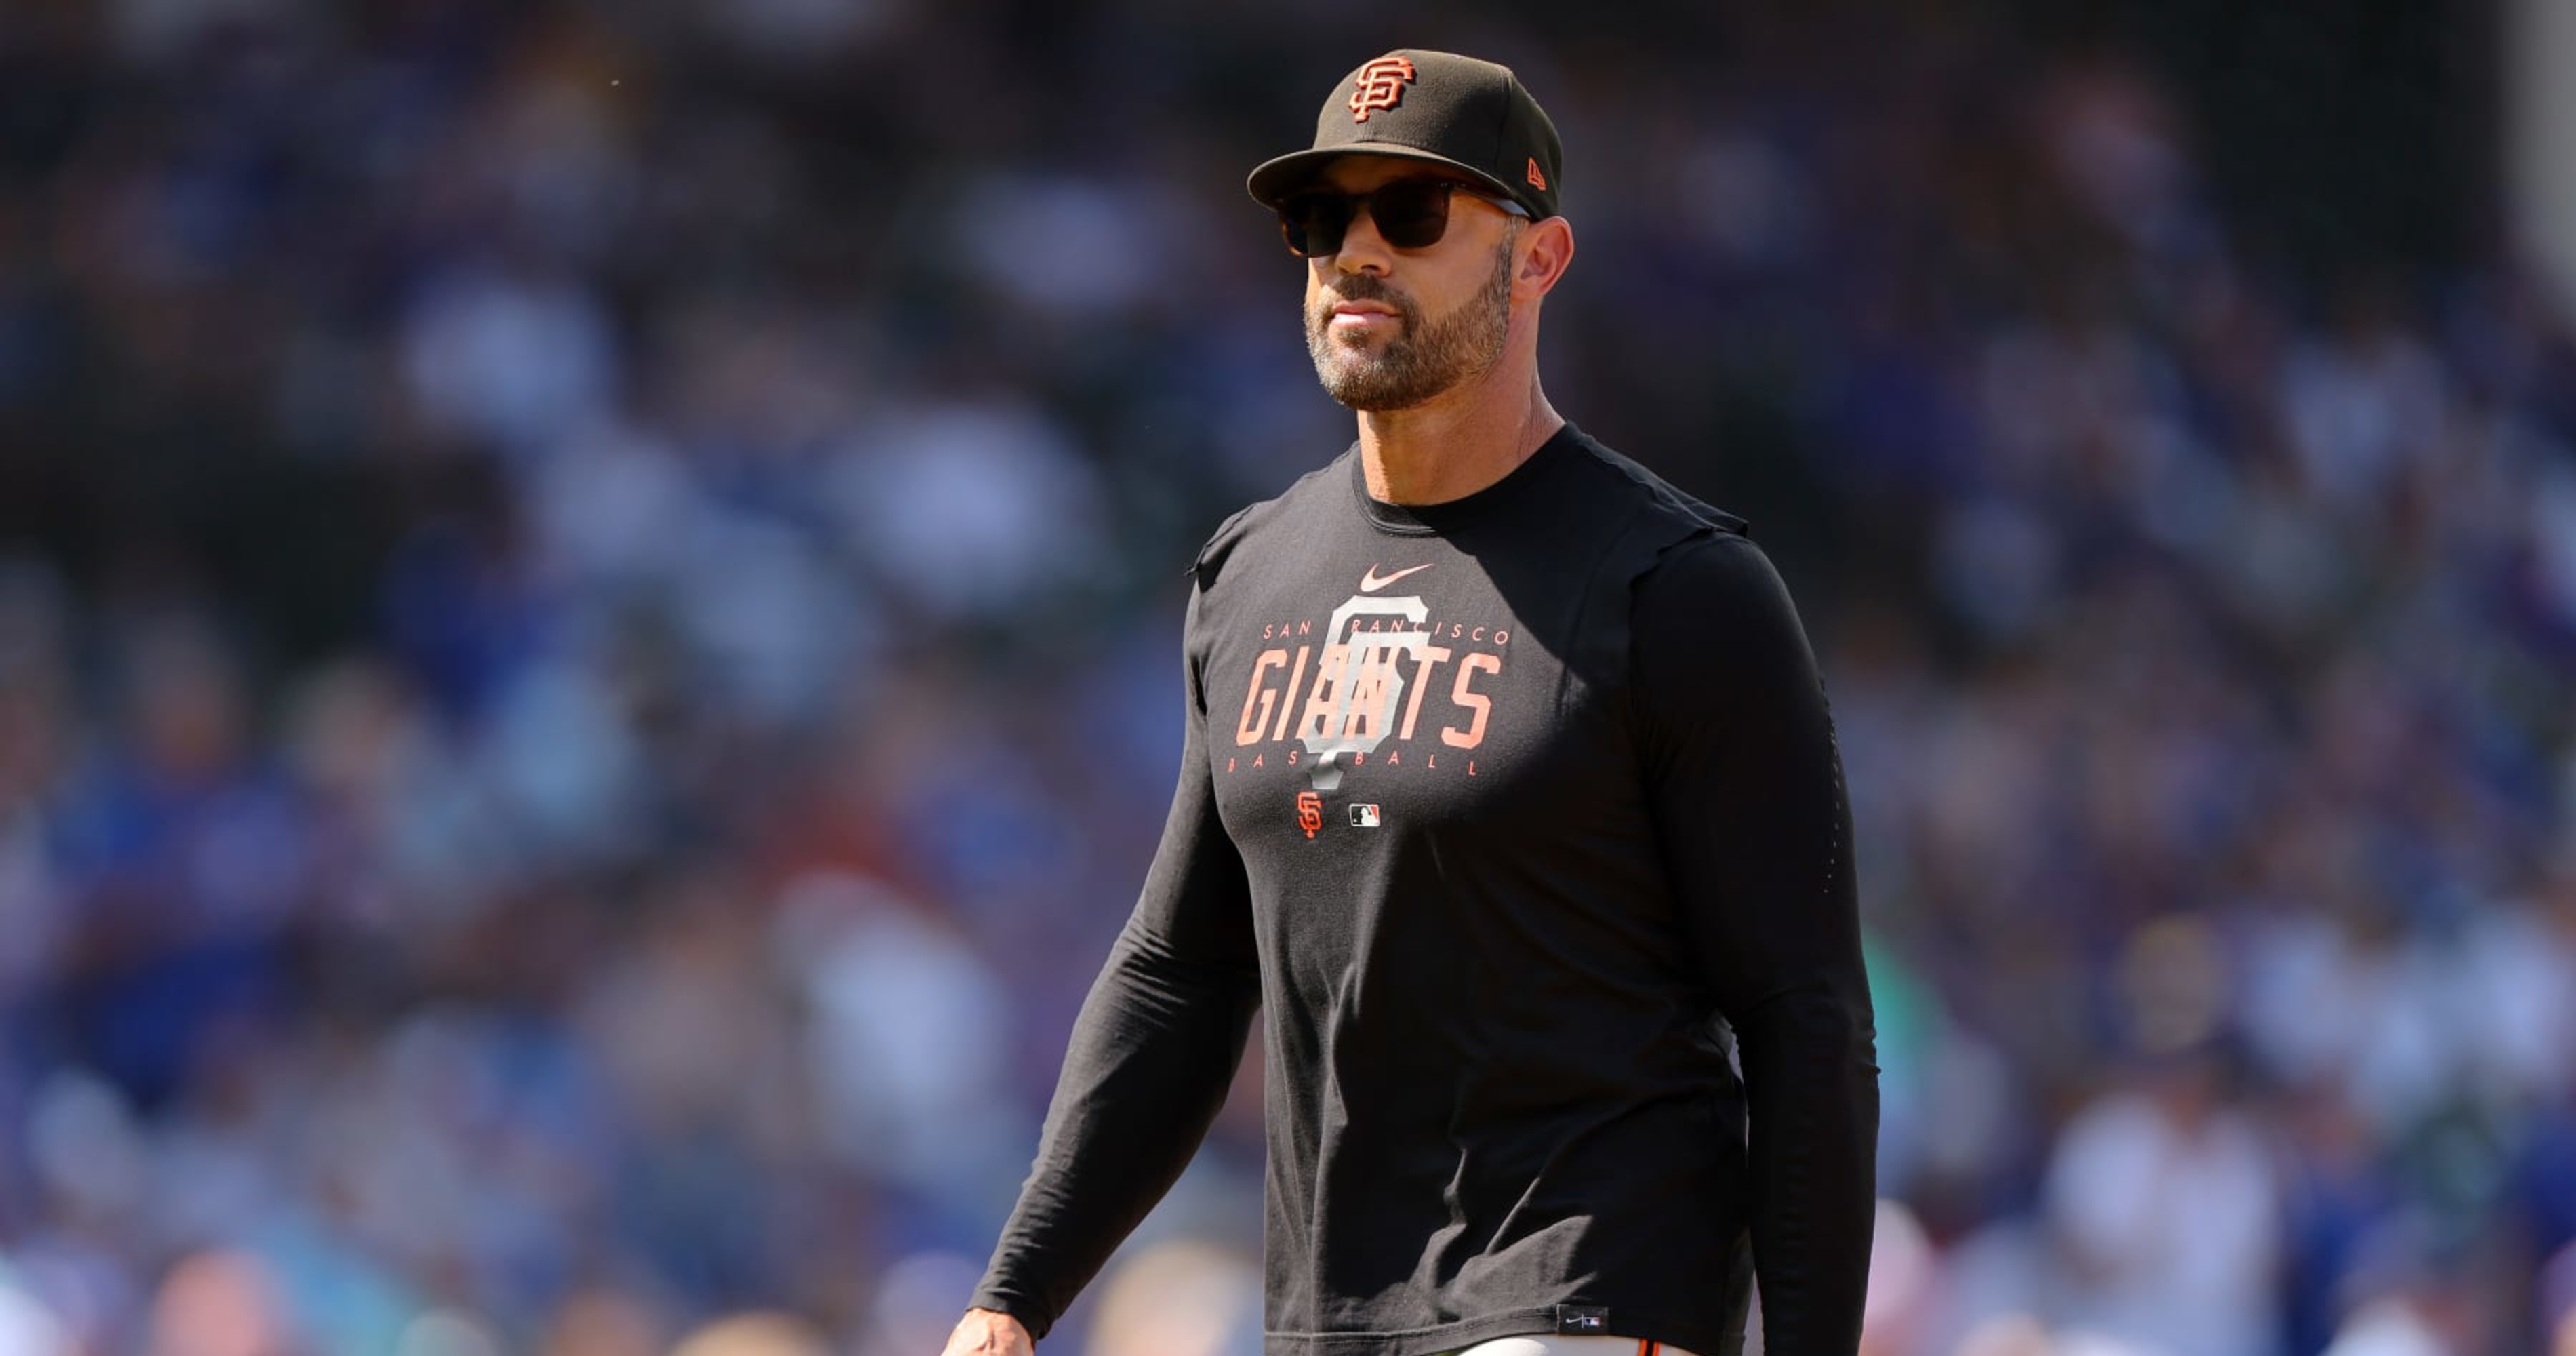 Just in: The San Francisco Giants have made an offer of $360